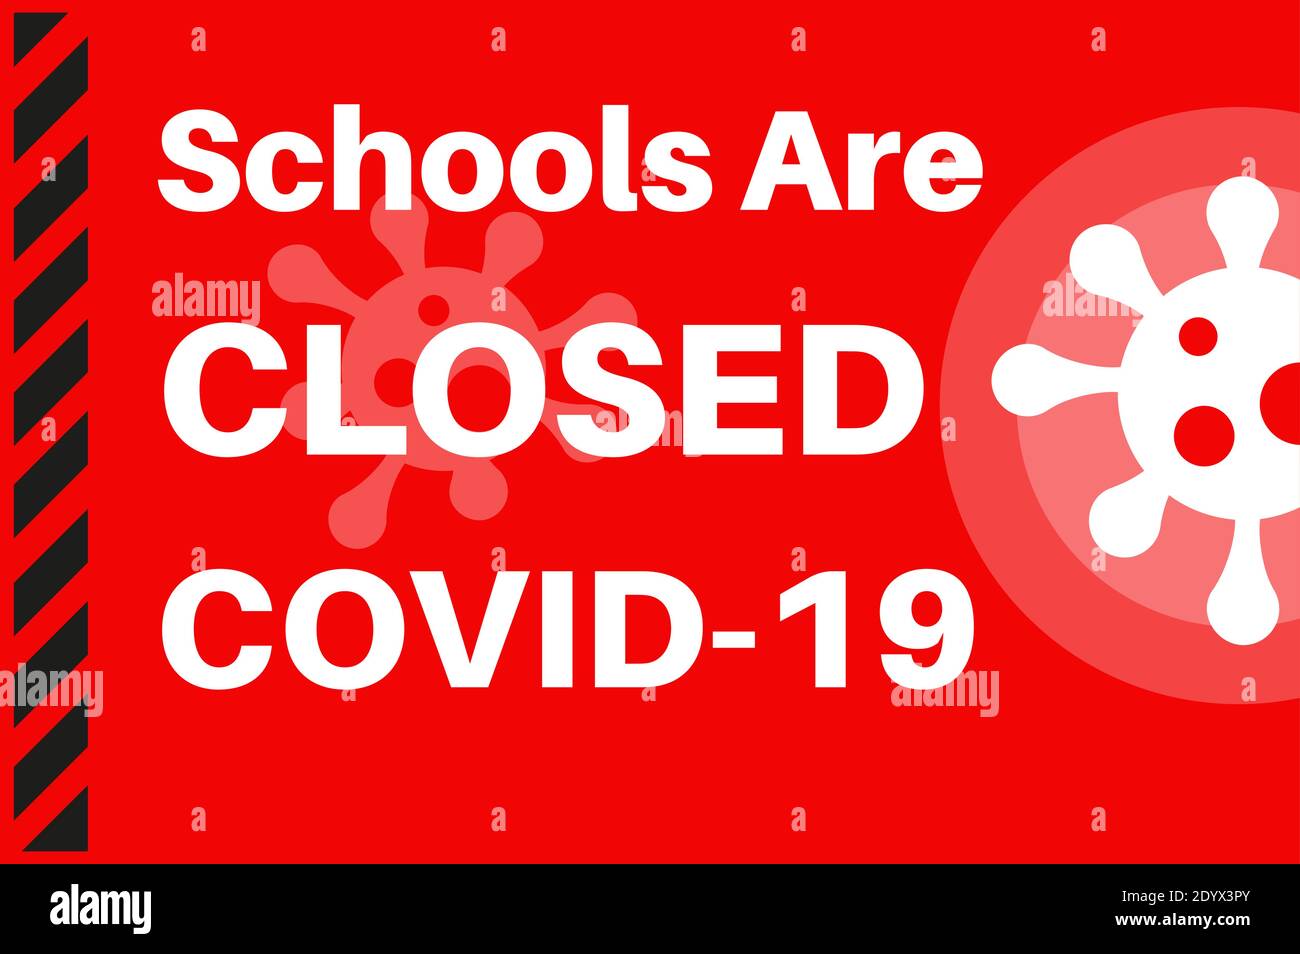 Schools Closed Covid-19 - Vector Illustration with virus logo on a red background. Stock Vector